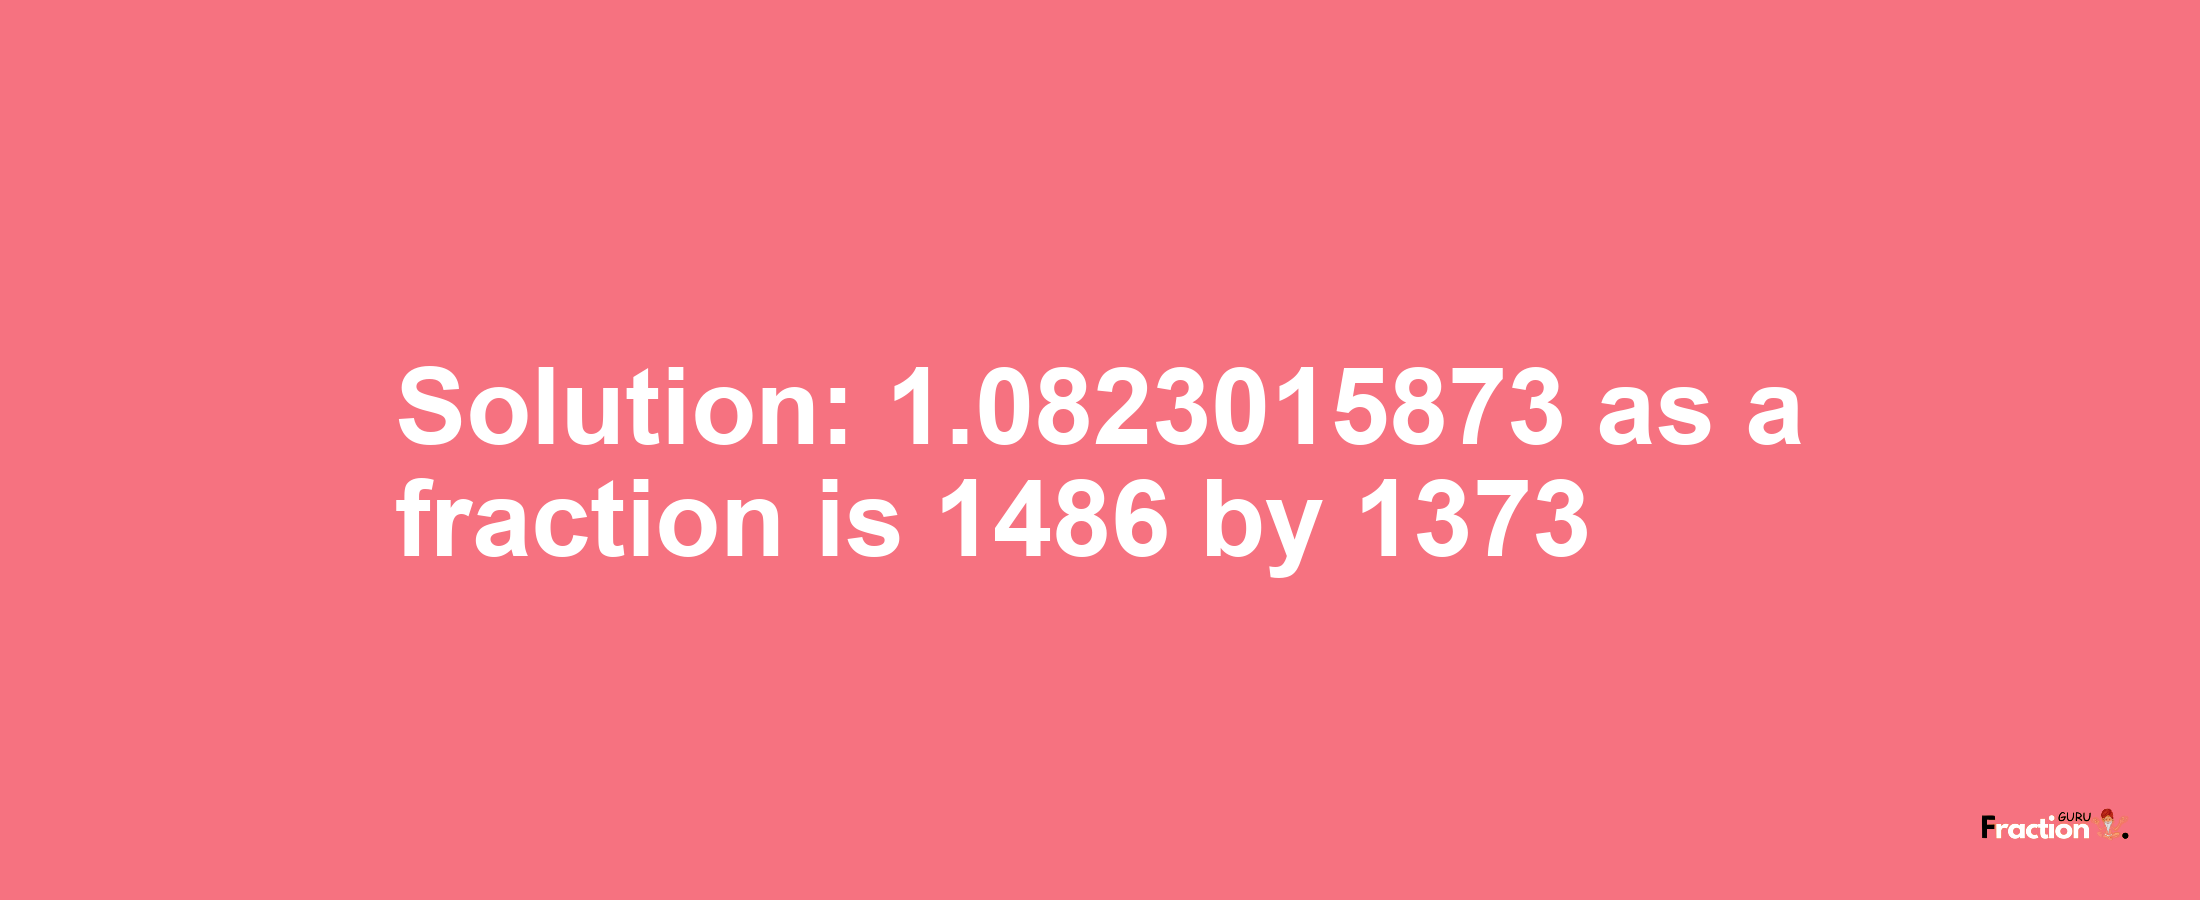 Solution:1.0823015873 as a fraction is 1486/1373